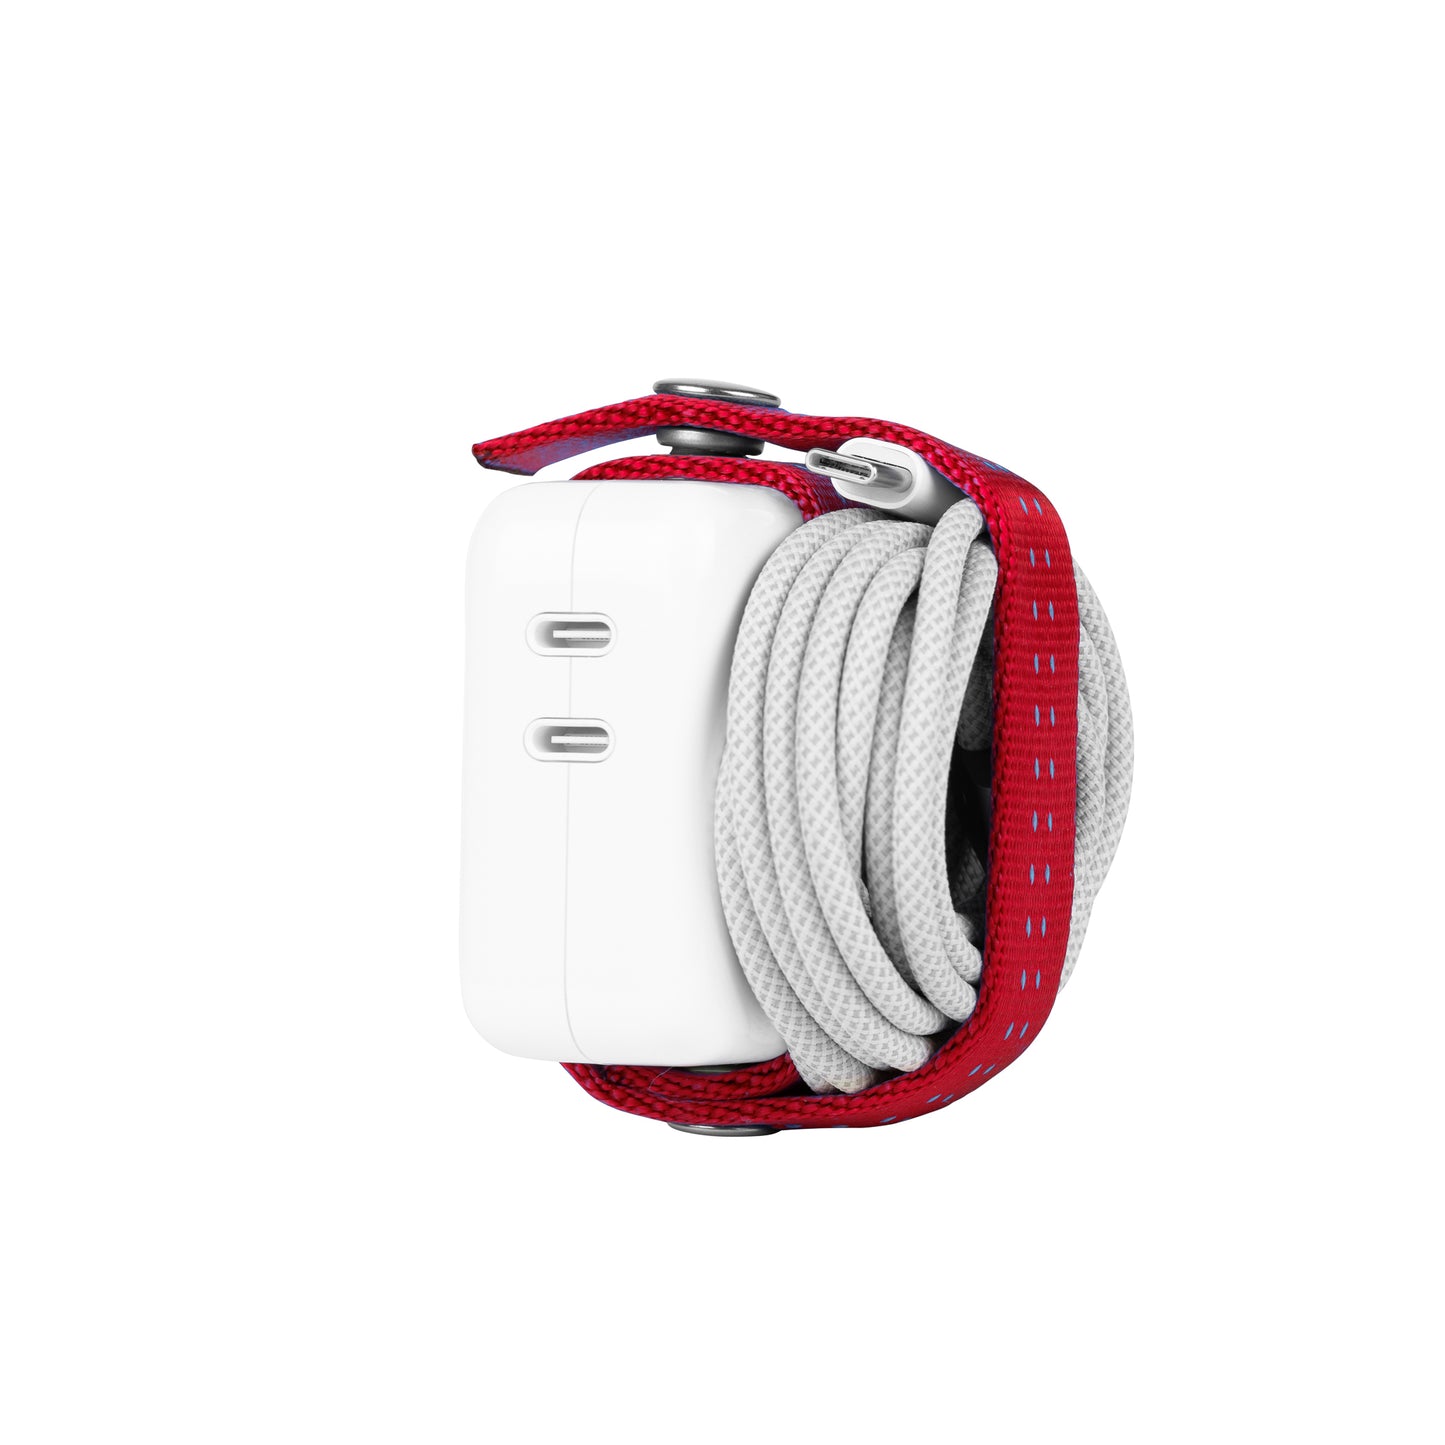 35 Watt Charger Strap - RED